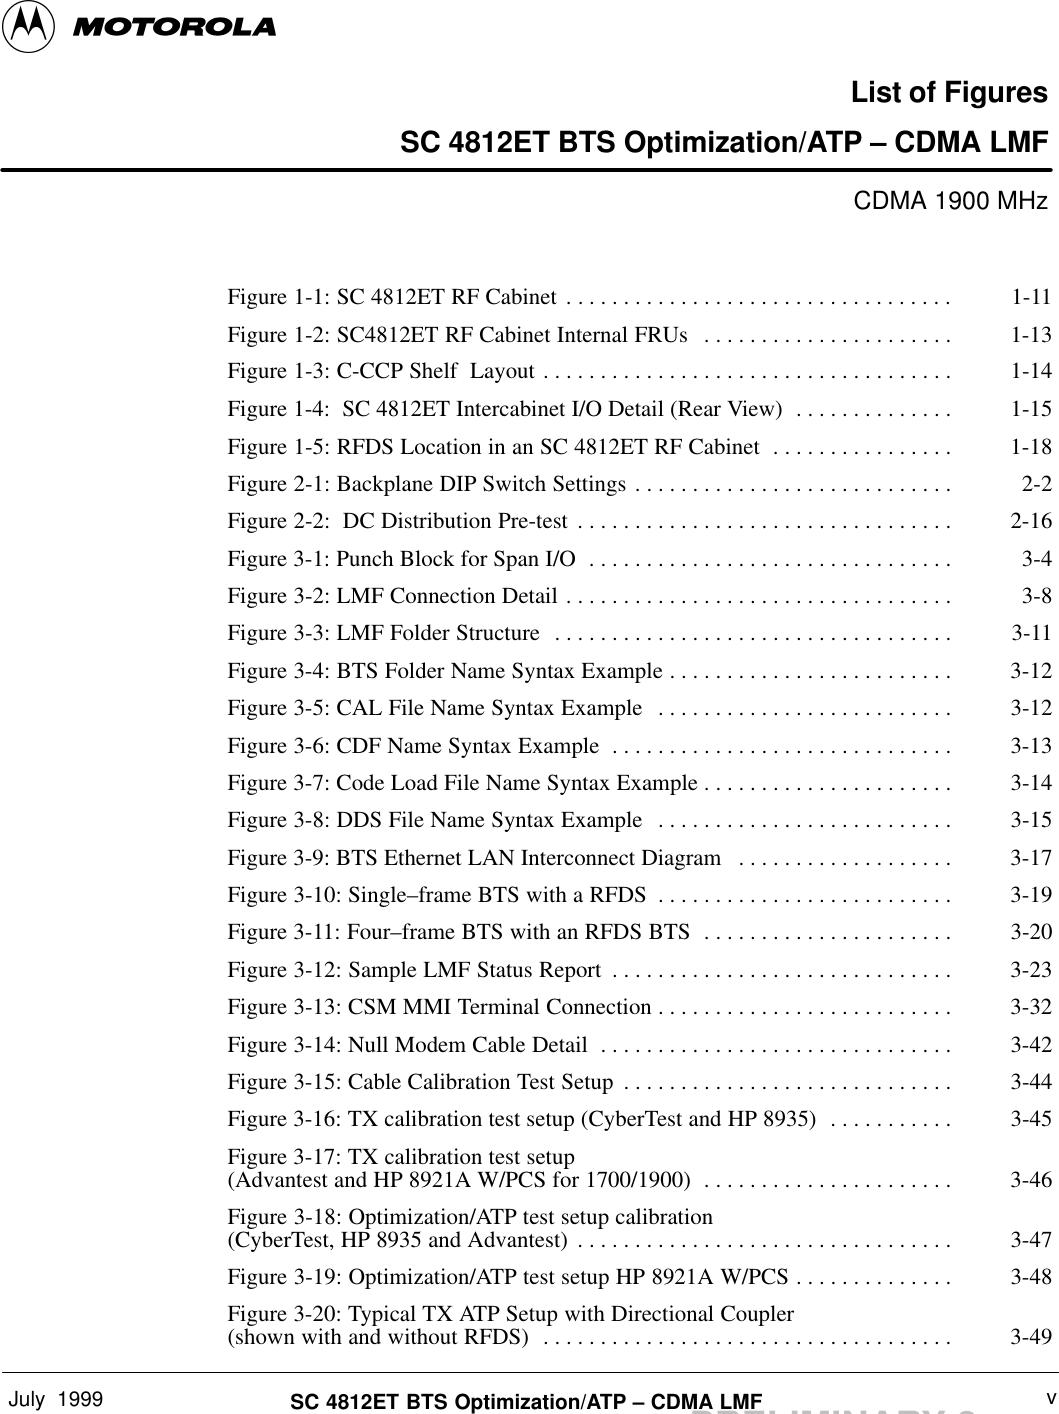 July  1999 vSC 4812ET BTS Optimization/ATP – CDMA LMFPRELIMINARY 2List of FiguresSC 4812ET BTS Optimization/ATP – CDMA LMFCDMA 1900 MHzFigure 1-1: SC 4812ET RF Cabinet 1-11. . . . . . . . . . . . . . . . . . . . . . . . . . . . . . . . . . Figure 1-2: SC4812ET RF Cabinet Internal FRUs 1-13. . . . . . . . . . . . . . . . . . . . . . Figure 1-3: C-CCP Shelf  Layout 1-14. . . . . . . . . . . . . . . . . . . . . . . . . . . . . . . . . . . . Figure 1-4:  SC 4812ET Intercabinet I/O Detail (Rear View) 1-15. . . . . . . . . . . . . . Figure 1-5: RFDS Location in an SC 4812ET RF Cabinet 1-18. . . . . . . . . . . . . . . . Figure 2-1: Backplane DIP Switch Settings 2-2. . . . . . . . . . . . . . . . . . . . . . . . . . . . Figure 2-2:  DC Distribution Pre-test 2-16. . . . . . . . . . . . . . . . . . . . . . . . . . . . . . . . . Figure 3-1: Punch Block for Span I/O 3-4. . . . . . . . . . . . . . . . . . . . . . . . . . . . . . . . Figure 3-2: LMF Connection Detail 3-8. . . . . . . . . . . . . . . . . . . . . . . . . . . . . . . . . . Figure 3-3: LMF Folder Structure 3-11. . . . . . . . . . . . . . . . . . . . . . . . . . . . . . . . . . . Figure 3-4: BTS Folder Name Syntax Example 3-12. . . . . . . . . . . . . . . . . . . . . . . . . Figure 3-5: CAL File Name Syntax Example 3-12. . . . . . . . . . . . . . . . . . . . . . . . . . Figure 3-6: CDF Name Syntax Example 3-13. . . . . . . . . . . . . . . . . . . . . . . . . . . . . . Figure 3-7: Code Load File Name Syntax Example 3-14. . . . . . . . . . . . . . . . . . . . . . Figure 3-8: DDS File Name Syntax Example 3-15. . . . . . . . . . . . . . . . . . . . . . . . . . Figure 3-9: BTS Ethernet LAN Interconnect Diagram 3-17. . . . . . . . . . . . . . . . . . . Figure 3-10: Single–frame BTS with a RFDS 3-19. . . . . . . . . . . . . . . . . . . . . . . . . . Figure 3-11: Four–frame BTS with an RFDS BTS 3-20. . . . . . . . . . . . . . . . . . . . . . Figure 3-12: Sample LMF Status Report 3-23. . . . . . . . . . . . . . . . . . . . . . . . . . . . . . Figure 3-13: CSM MMI Terminal Connection 3-32. . . . . . . . . . . . . . . . . . . . . . . . . . Figure 3-14: Null Modem Cable Detail 3-42. . . . . . . . . . . . . . . . . . . . . . . . . . . . . . . Figure 3-15: Cable Calibration Test Setup 3-44. . . . . . . . . . . . . . . . . . . . . . . . . . . . . Figure 3-16: TX calibration test setup (CyberTest and HP 8935) 3-45. . . . . . . . . . . Figure 3-17: TX calibration test setup (Advantest and HP 8921A W/PCS for 1700/1900) 3-46. . . . . . . . . . . . . . . . . . . . . . Figure 3-18: Optimization/ATP test setup calibration (CyberTest, HP 8935 and Advantest) 3-47. . . . . . . . . . . . . . . . . . . . . . . . . . . . . . . . . Figure 3-19: Optimization/ATP test setup HP 8921A W/PCS 3-48. . . . . . . . . . . . . . Figure 3-20: Typical TX ATP Setup with Directional Coupler (shown with and without RFDS) 3-49. . . . . . . . . . . . . . . . . . . . . . . . . . . . . . . . . . . . 